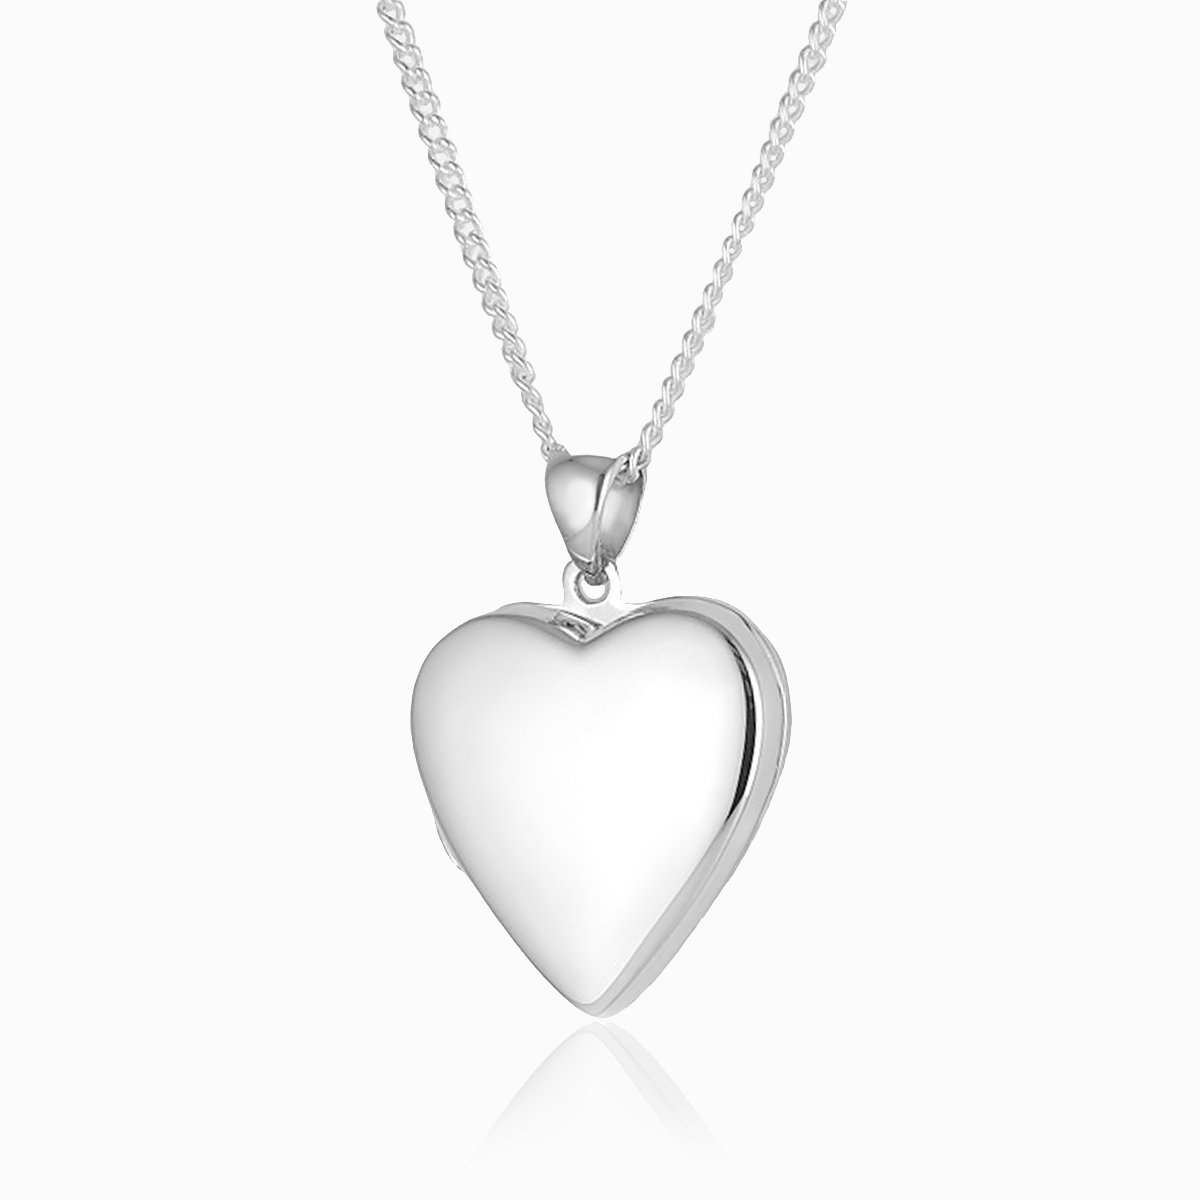 Front shot of a heart-shaped contemporary sterling silver heart locket on a sterling silver curb chain.